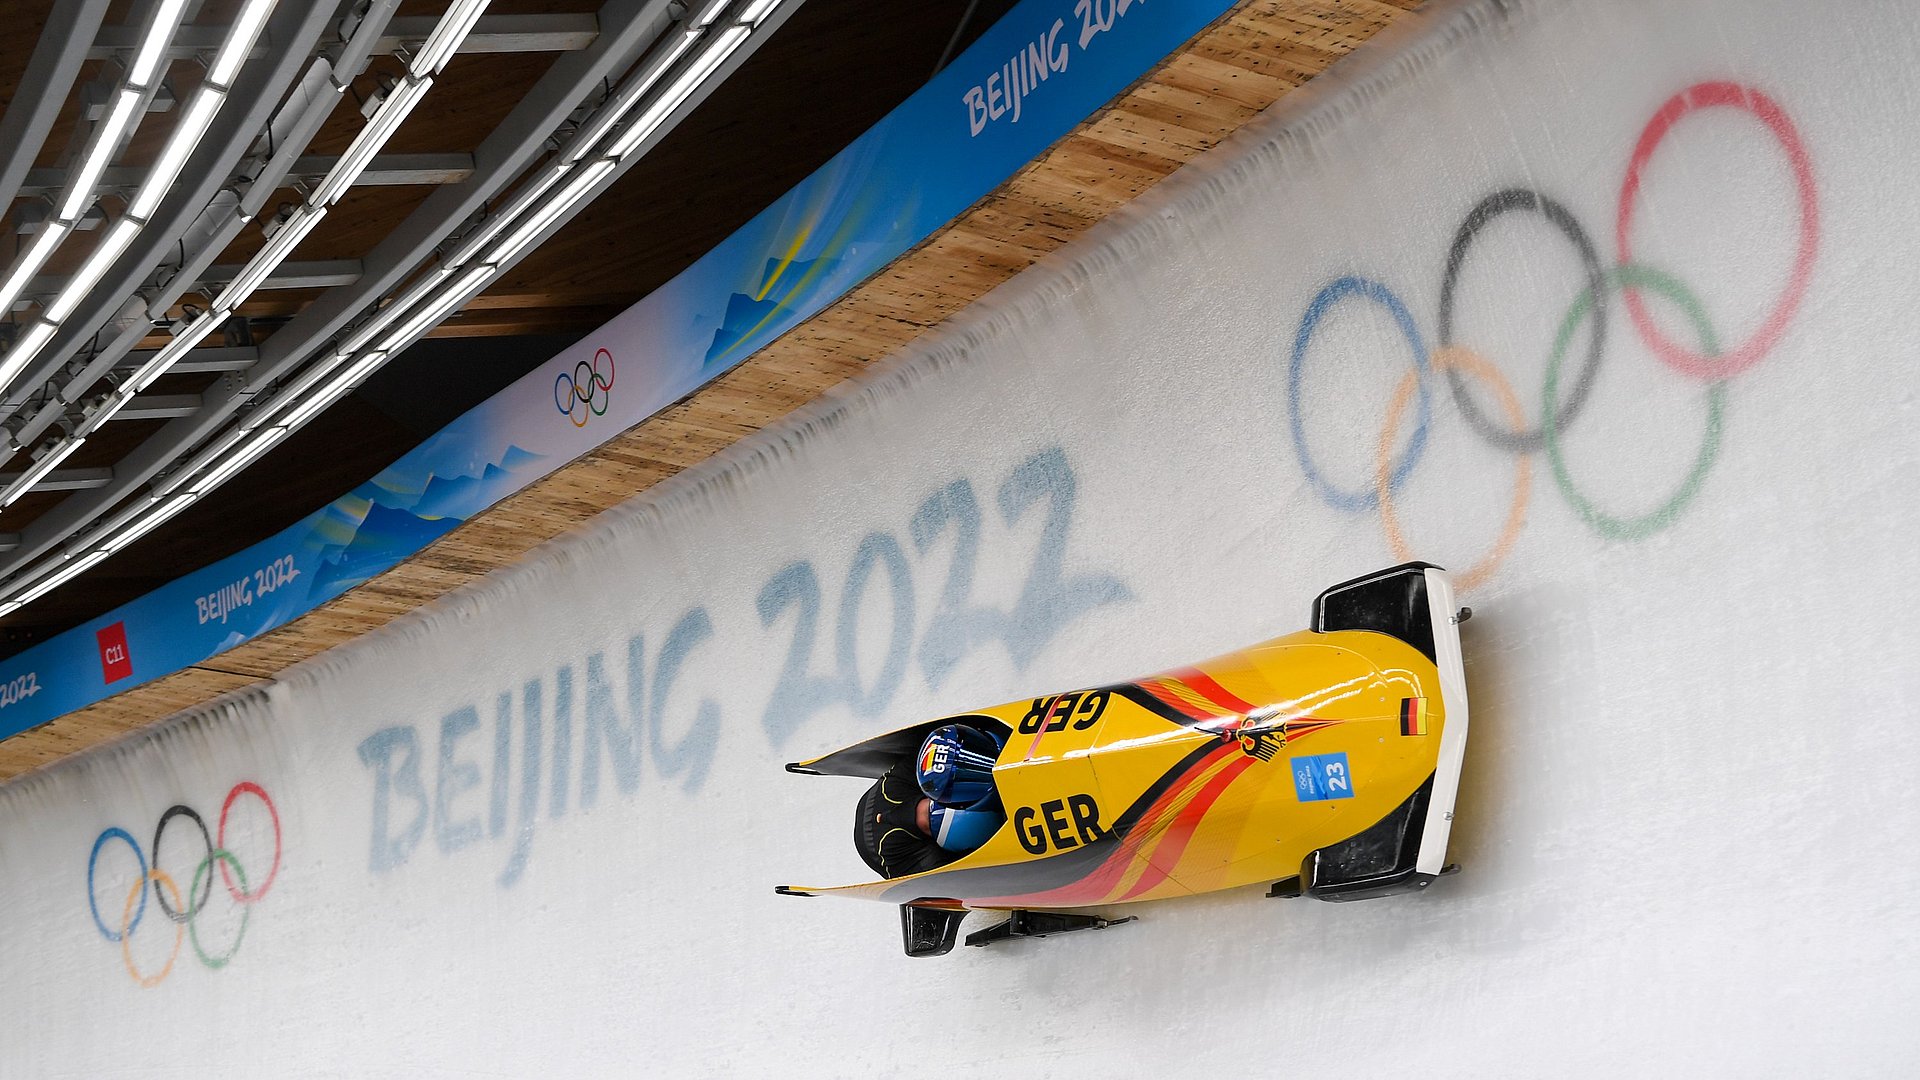 Two-man bobsleigh Bauer and Lochner at the Olympic Games in Beijing 